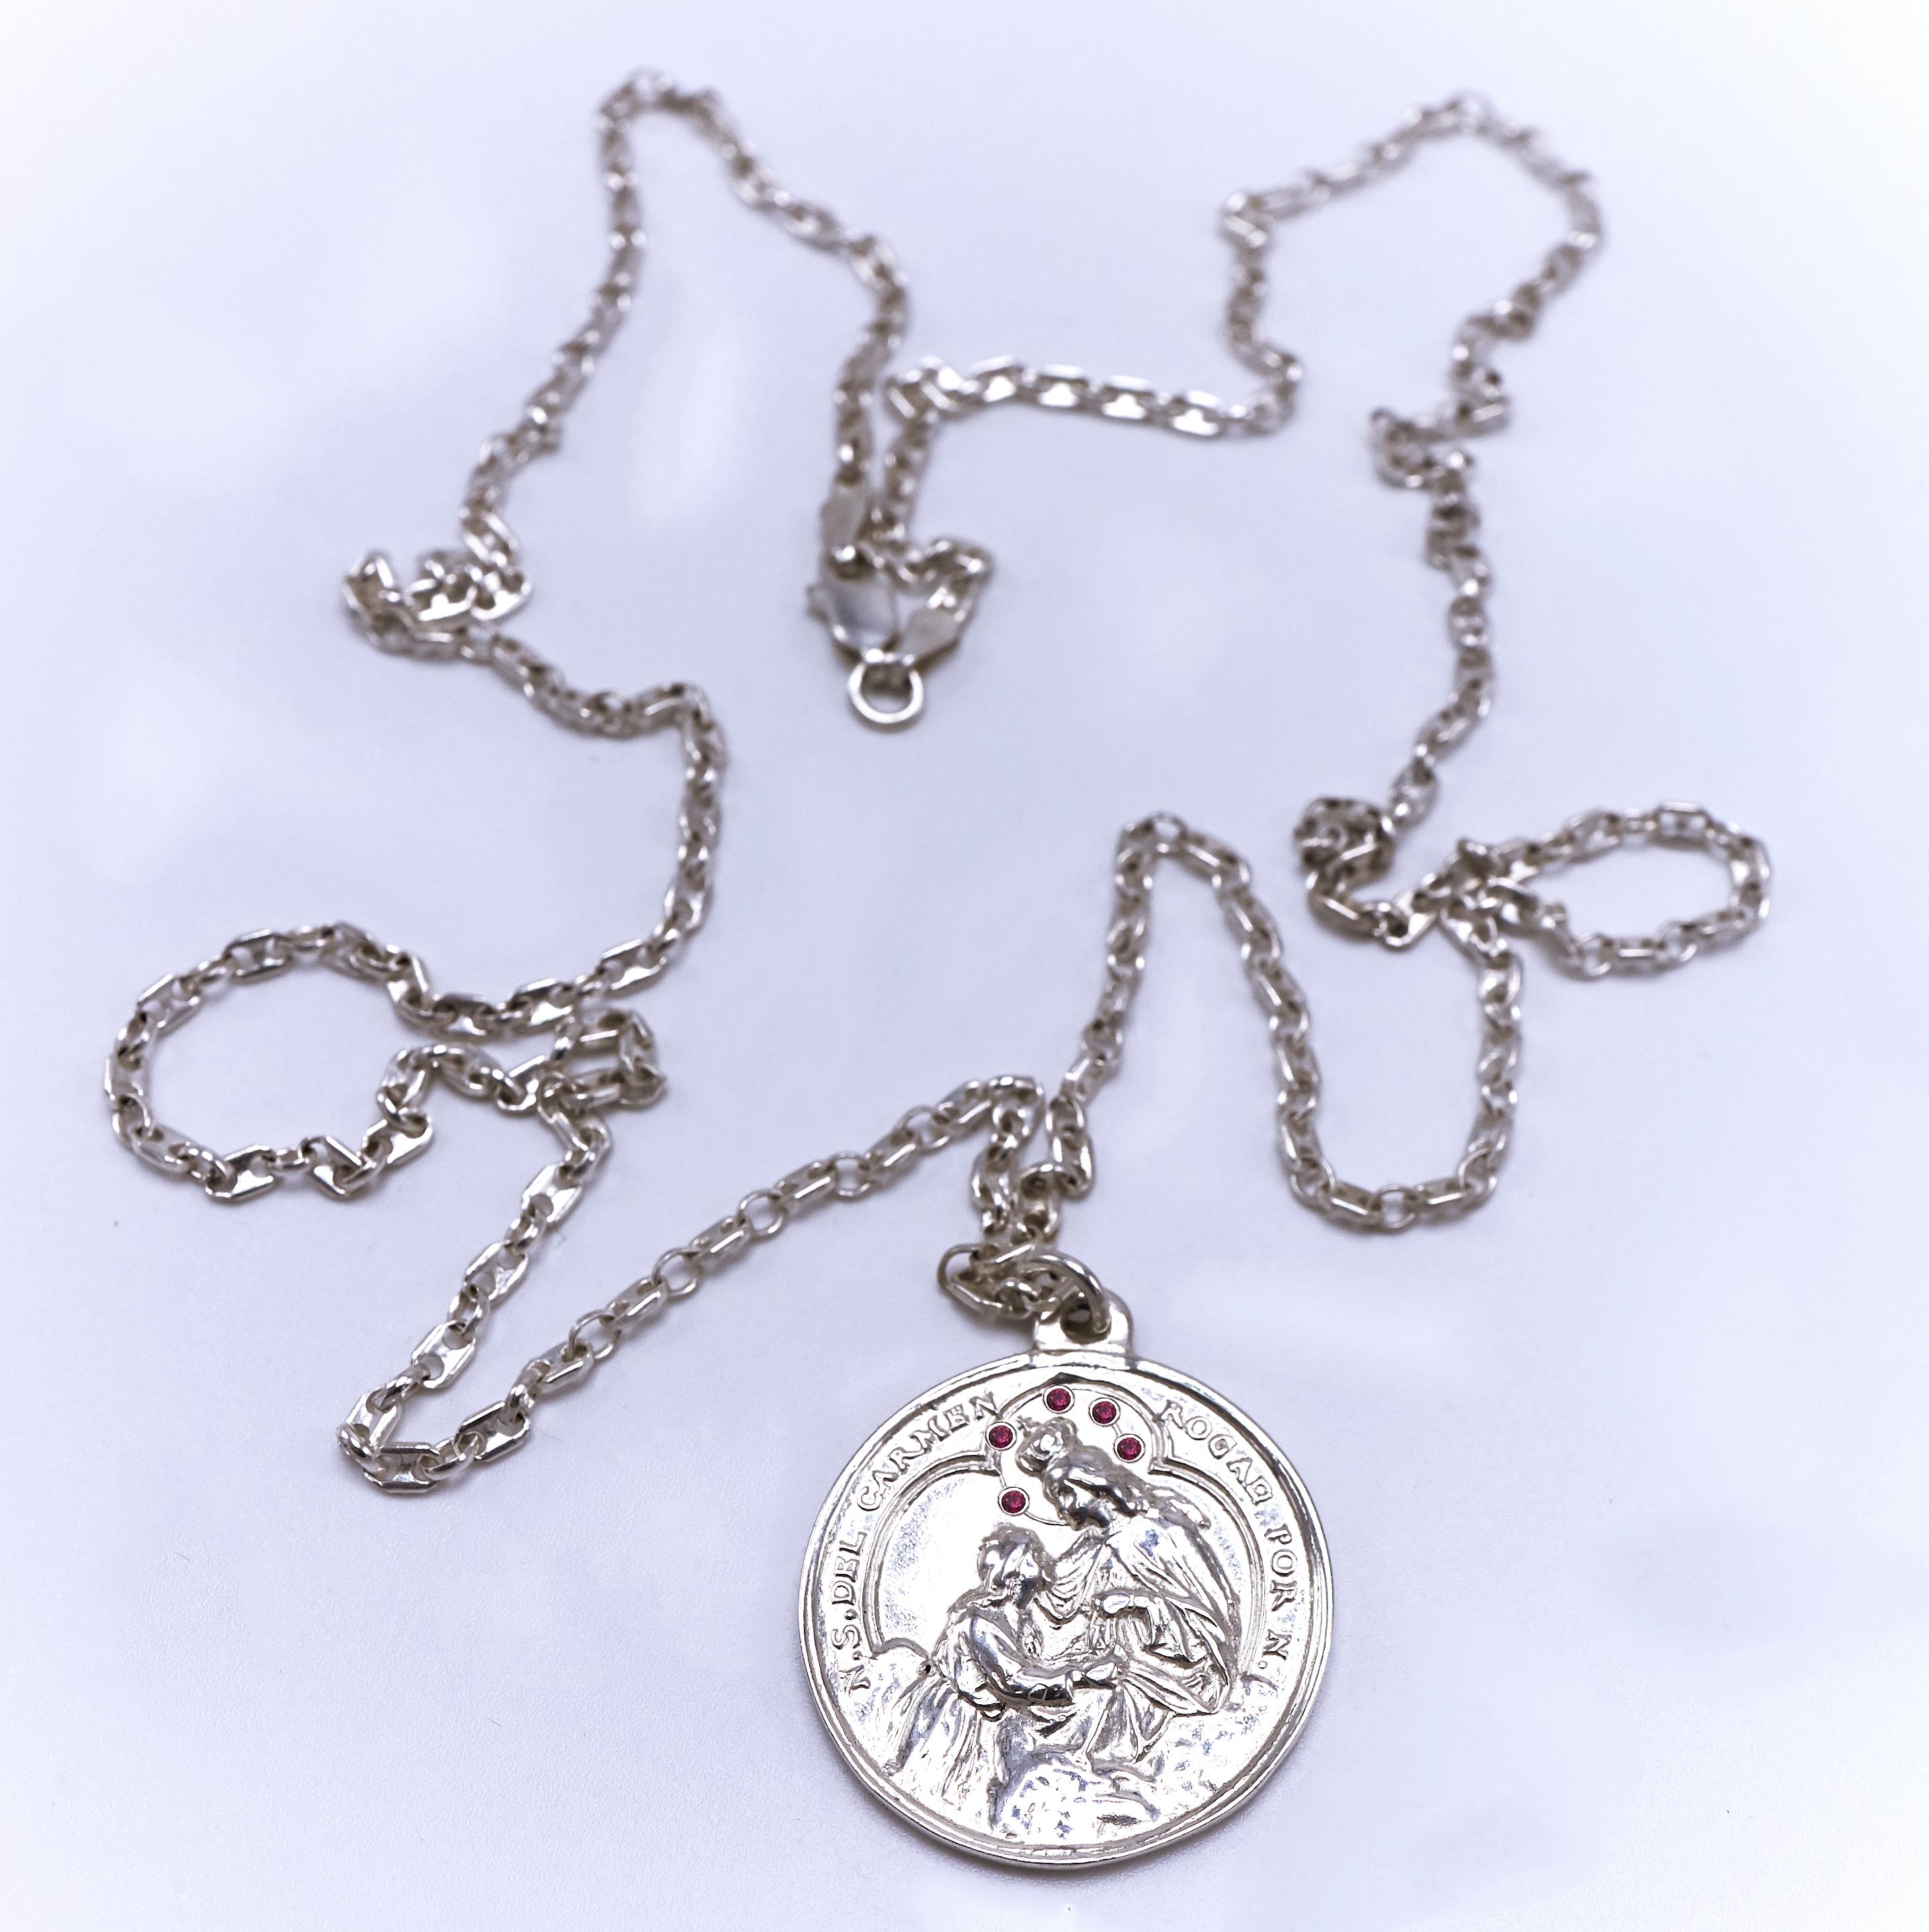 Medal Chain Necklace Miraculous Virgin Mary Ruby Silver J Dauphin

J DAUPHIN necklace 